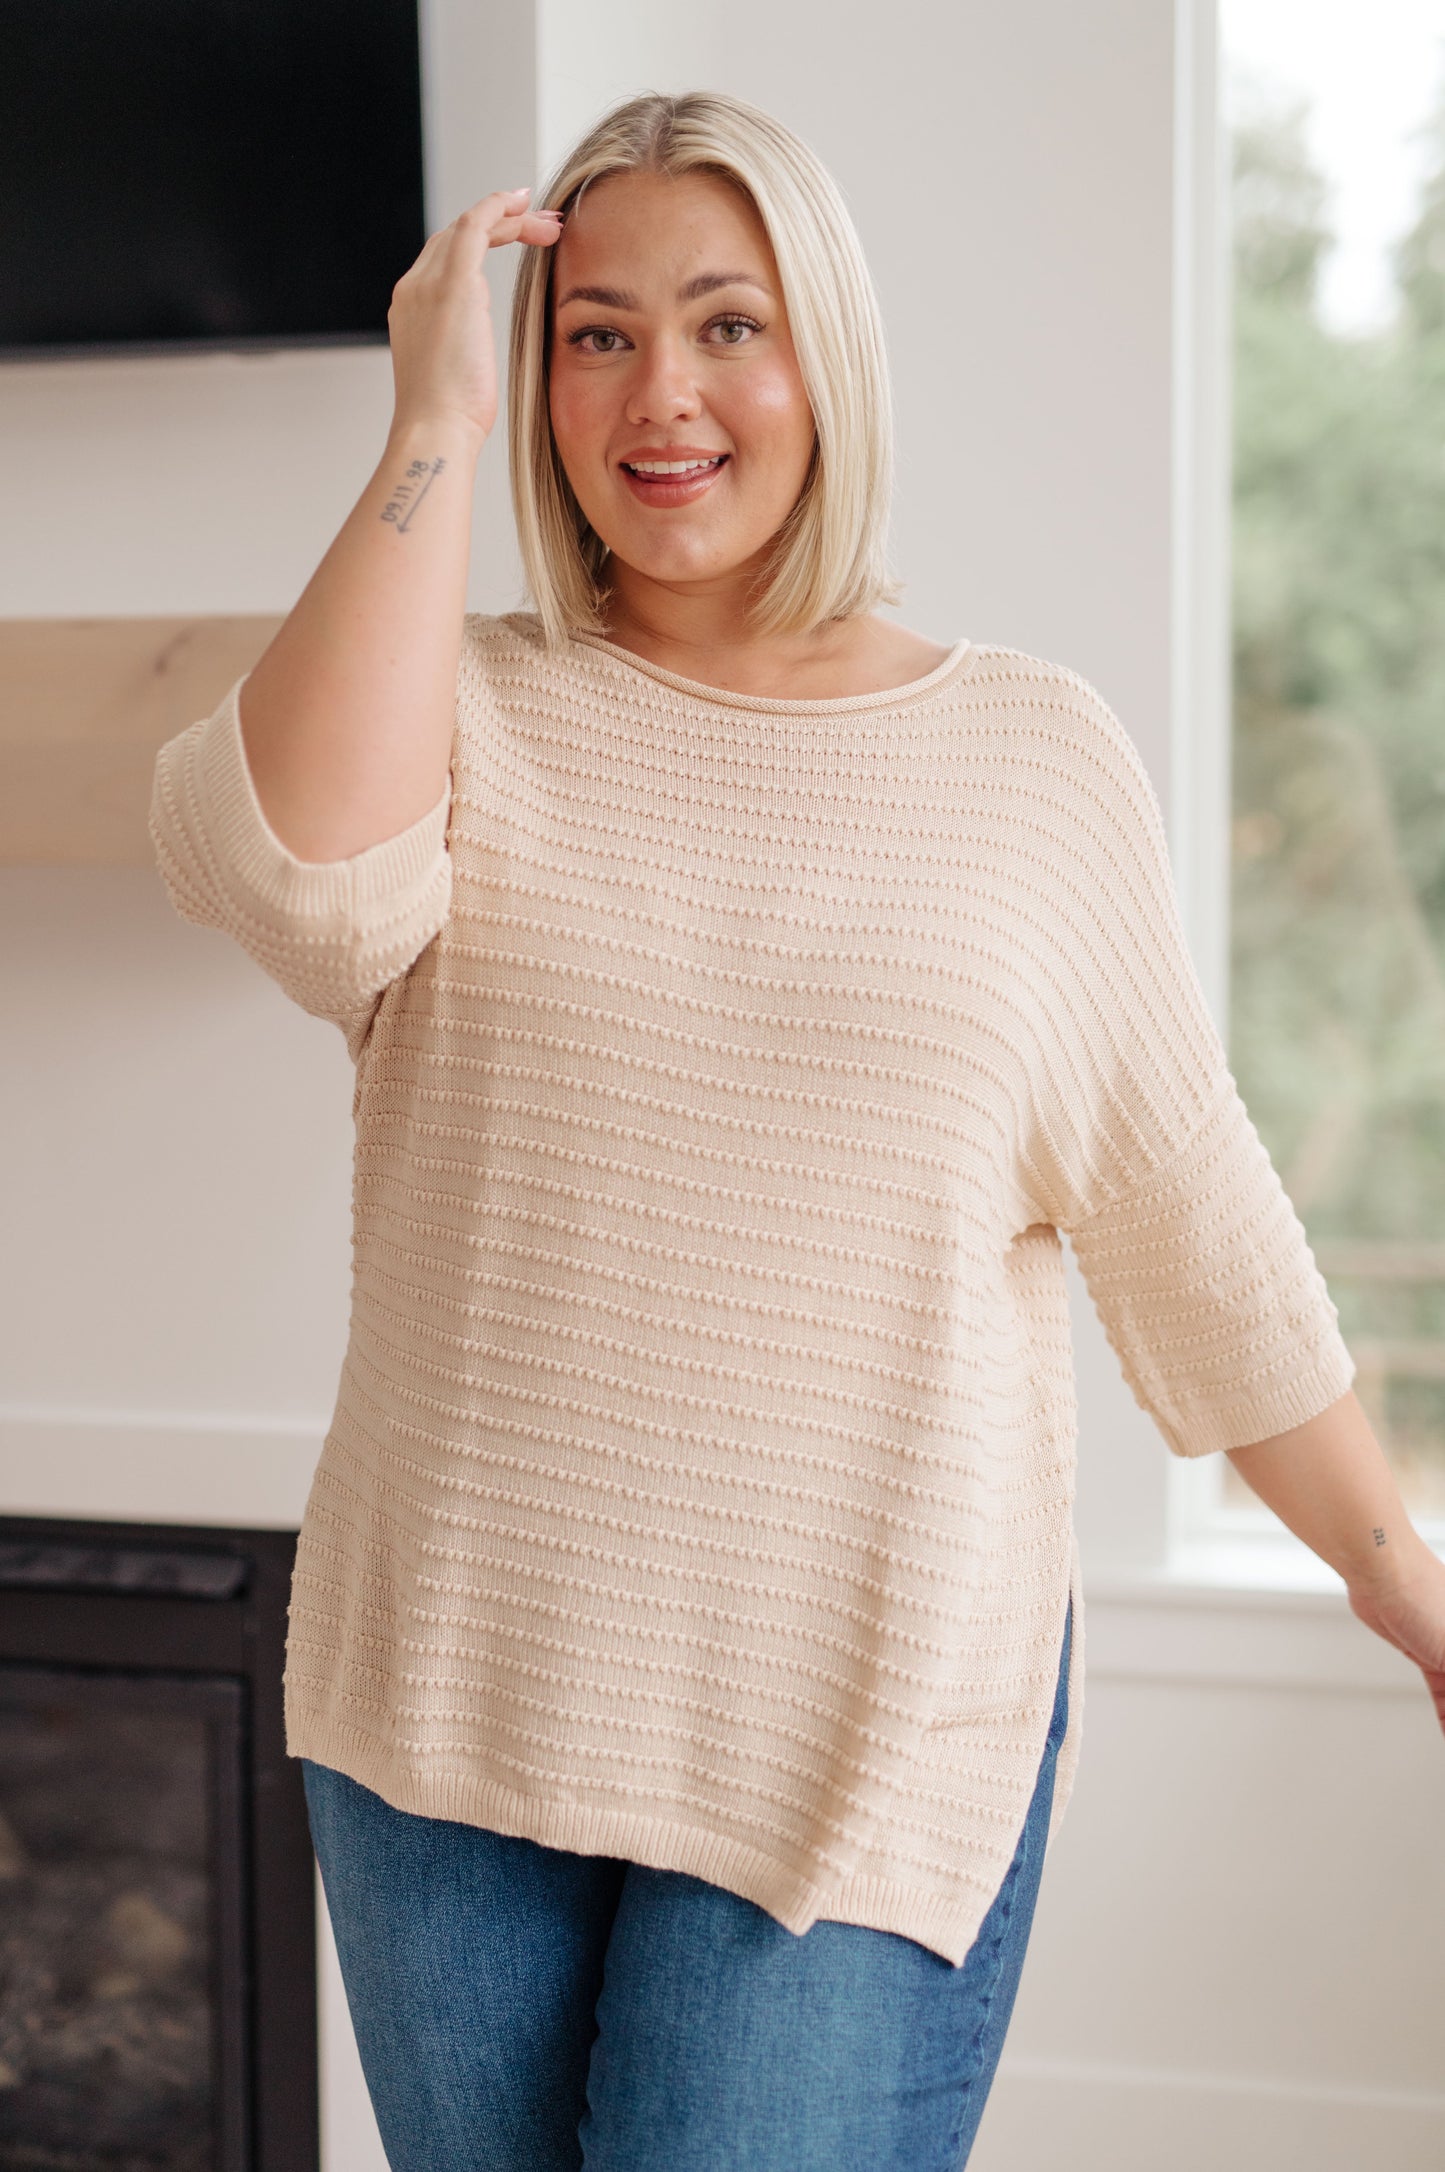 High Tide Oversized Top in Cream - Three Bears Boutique